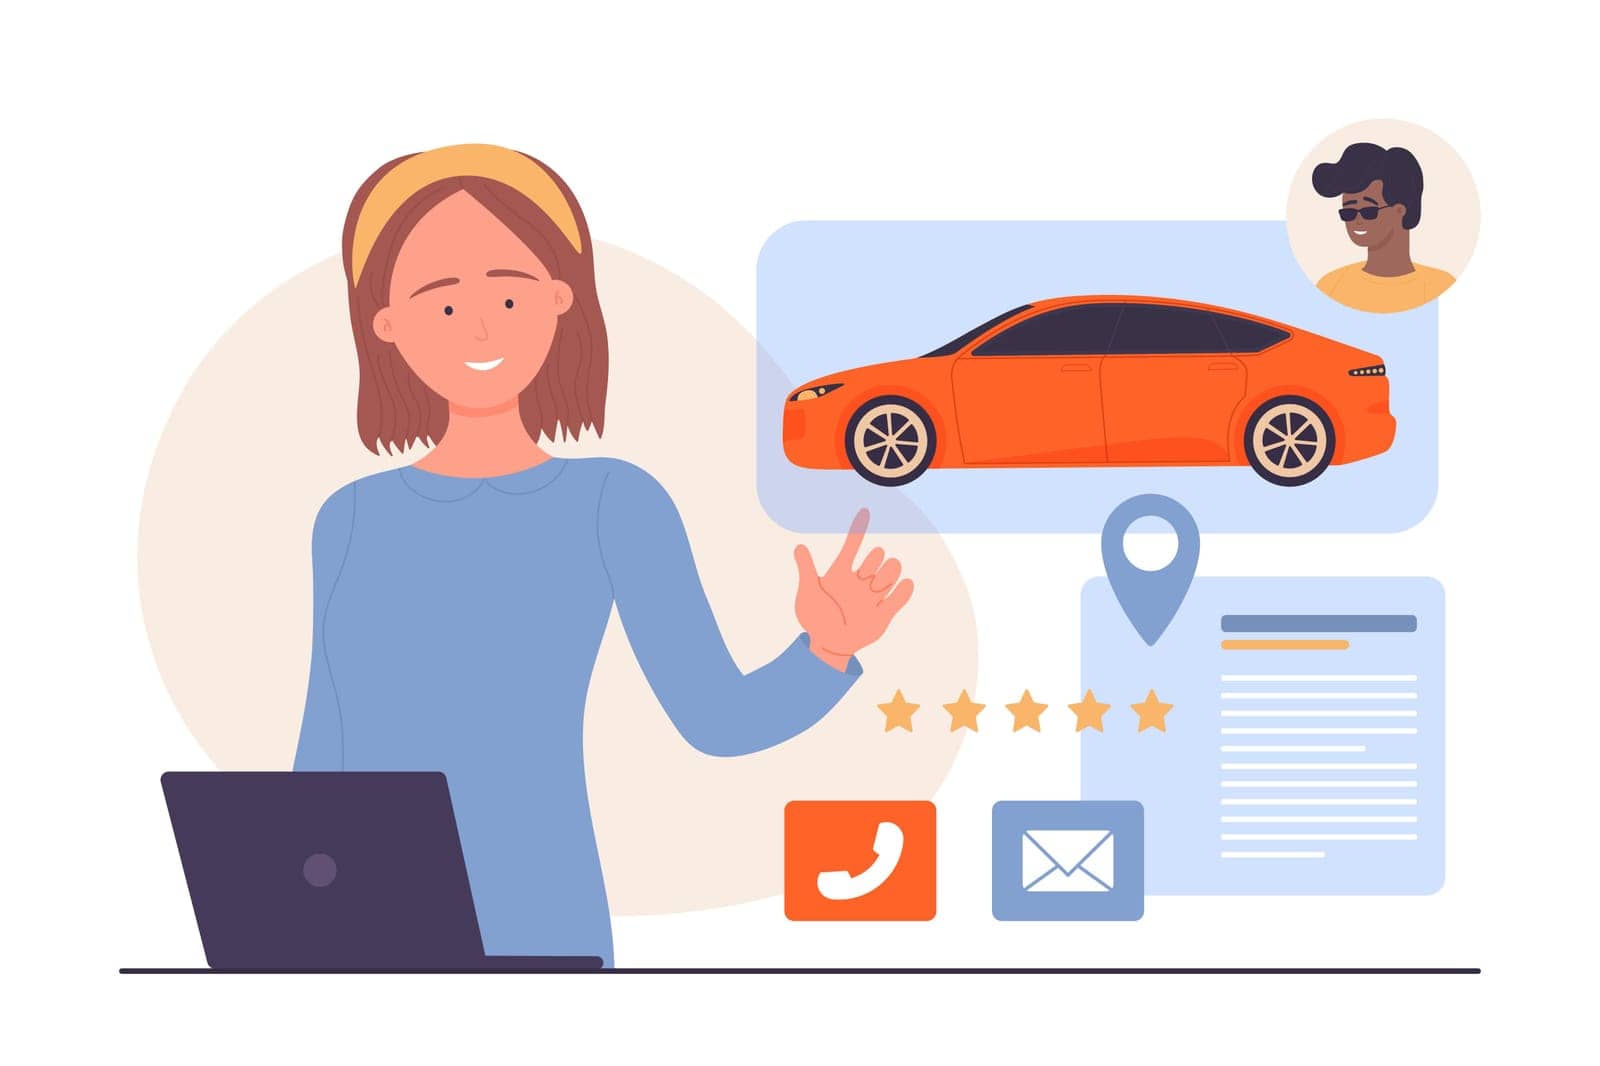 Buy car online vector illustration. Cartoon consumer touching automobile hologram in showroom of digital automotive shop, woman rating owners of new or used car with interactive mobile service